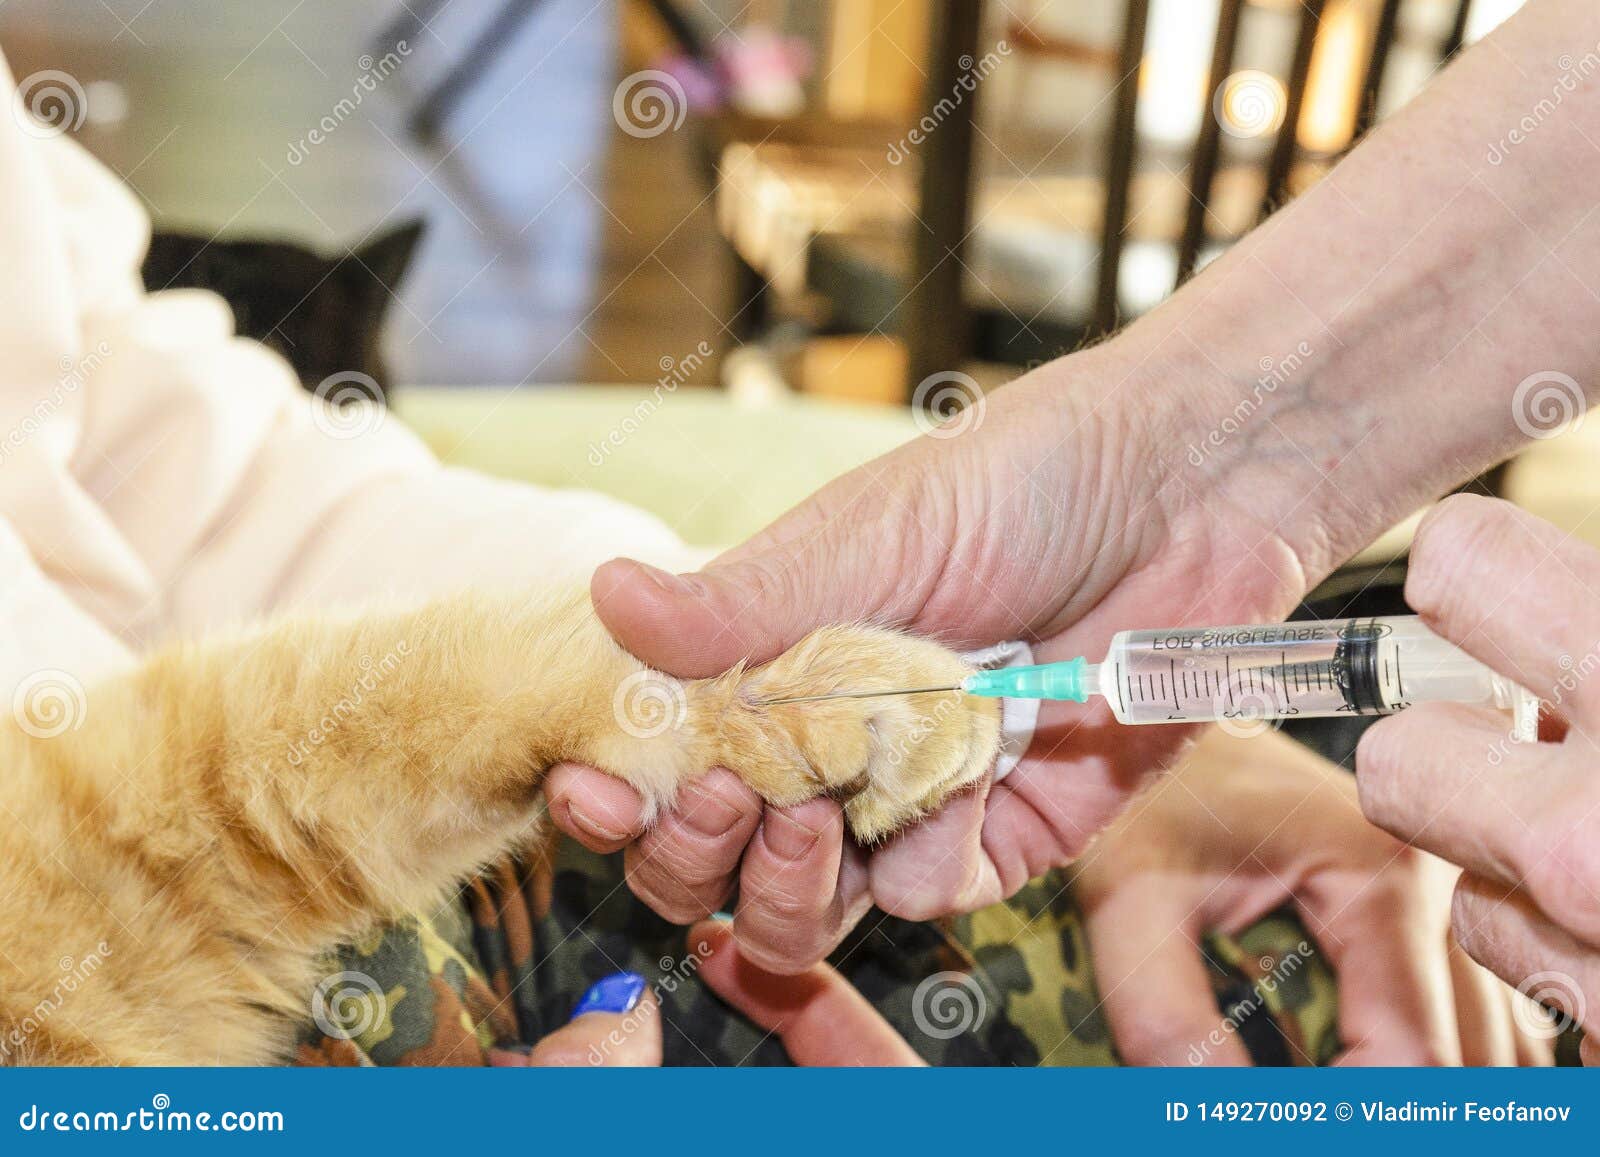 Cat With A Sick And Swollen Paw, The Concept Of Animal Treatment